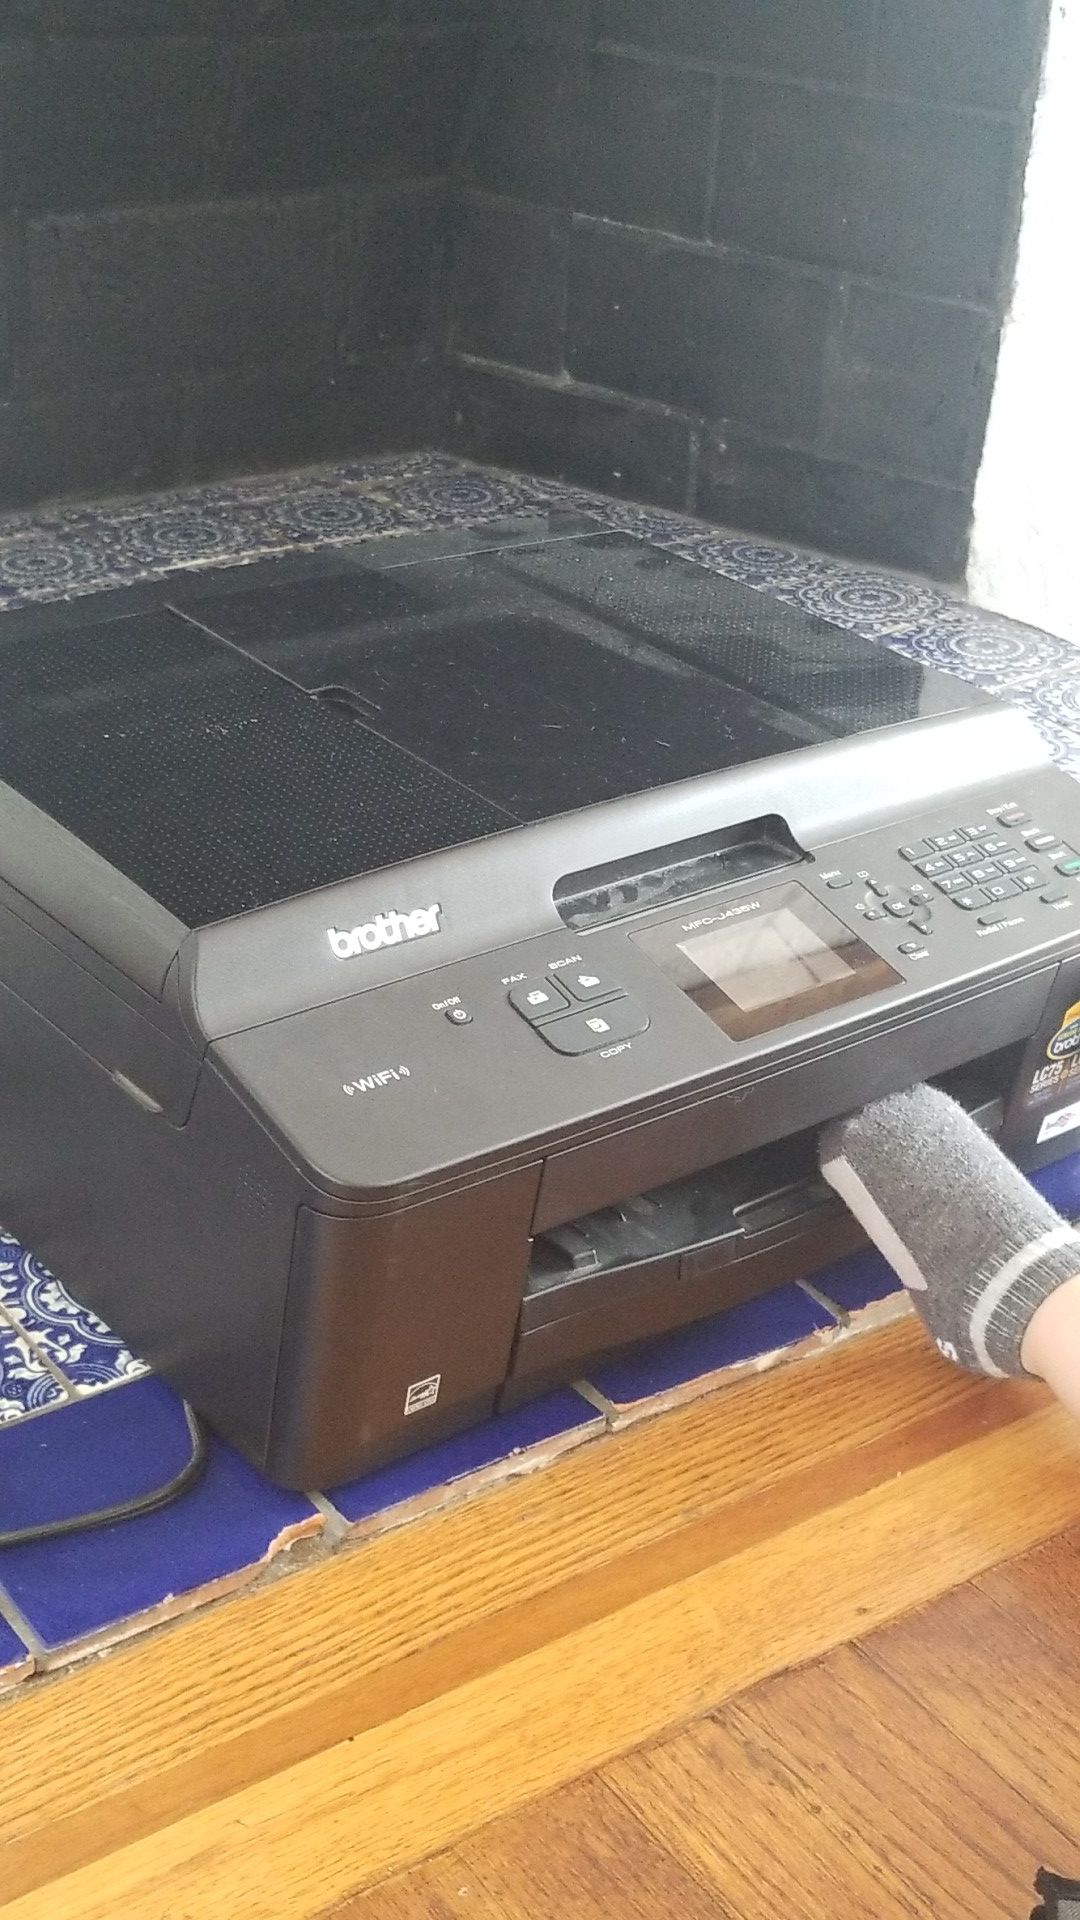 Free Brother Printer, Fax and Copier 3 in 1